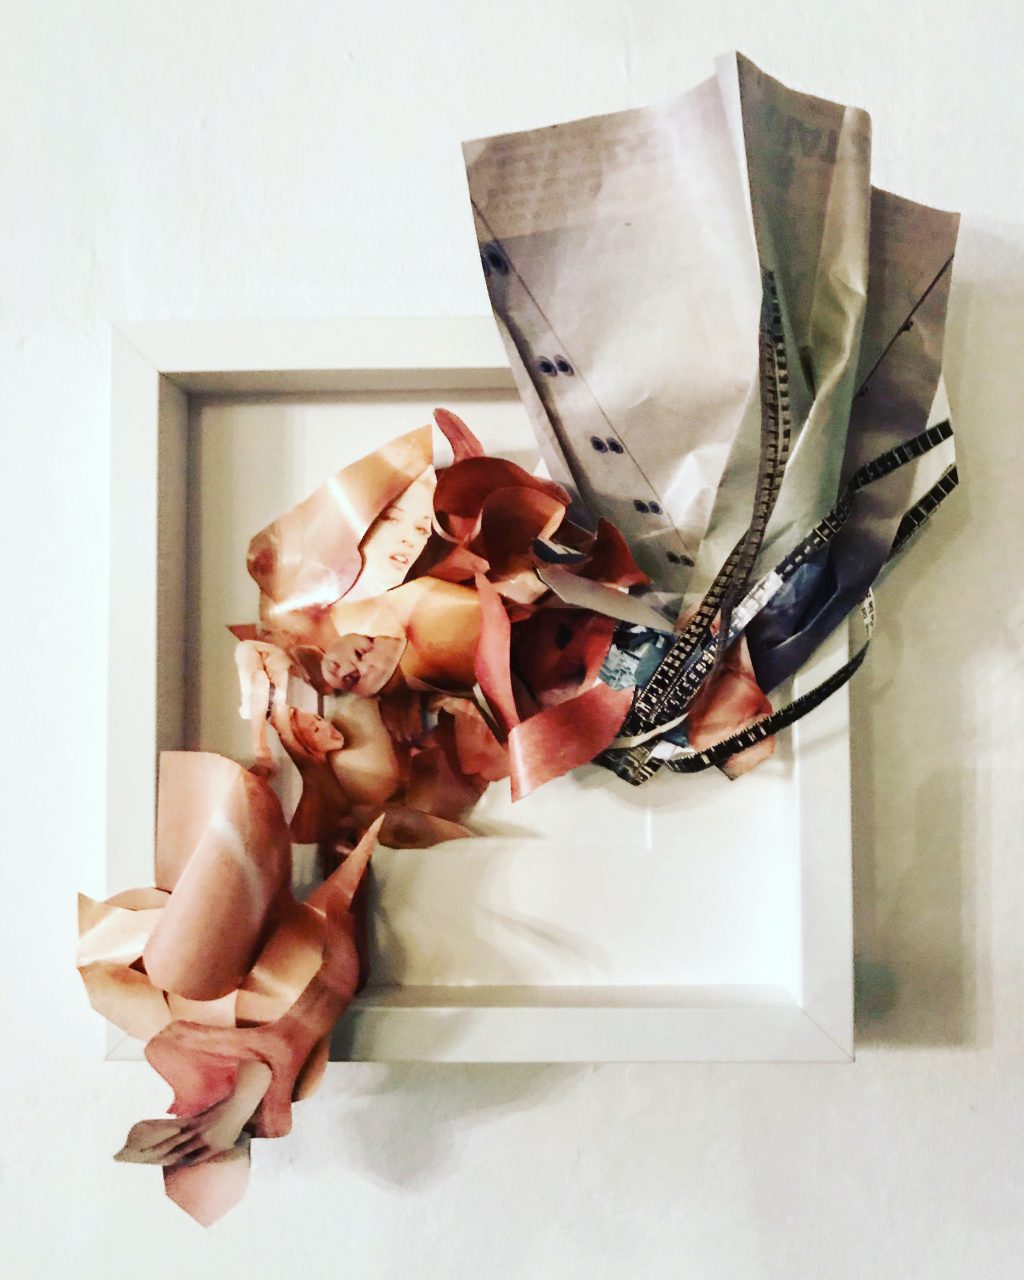 "I was told to drown and you told me to stop", 3D Collage March 2020 -Collaboration with Poet Ksenya Kumm. One image and one corresponding poem.